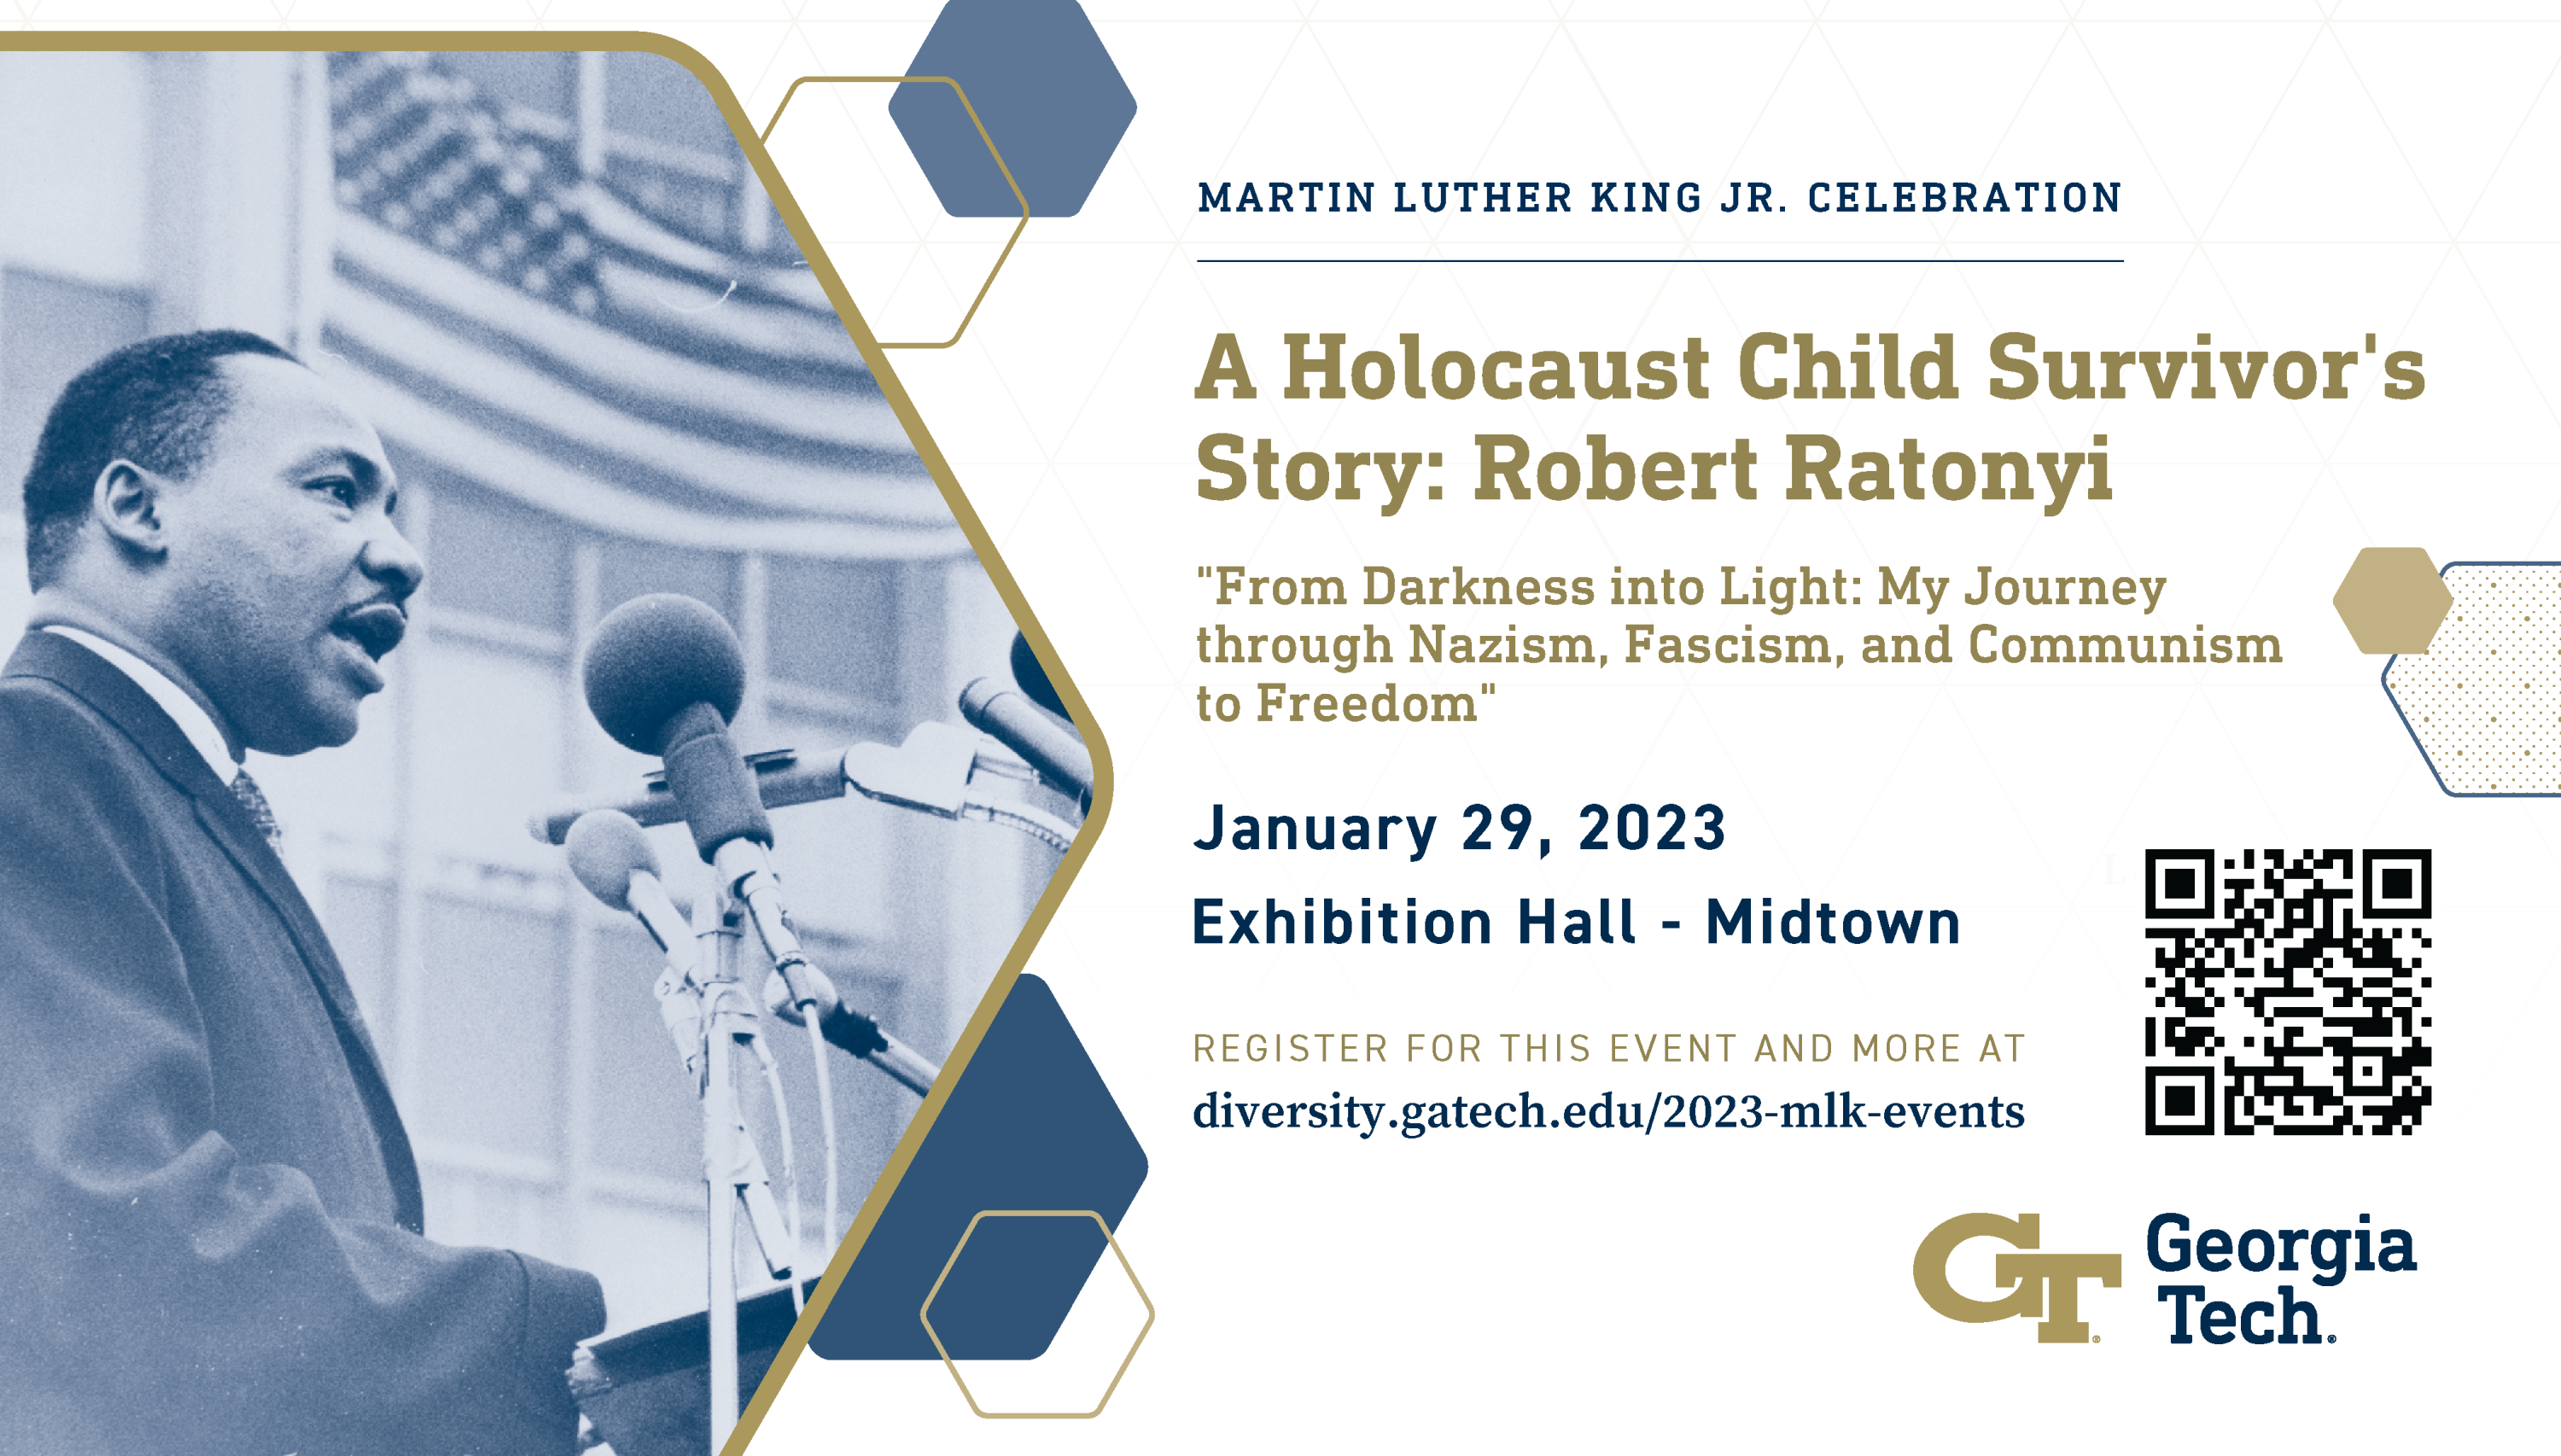 Robert Ratonyi was born in Budapest, Hungary, and he was just 6 years old when his parents were taken in a Jewish round-up. This is a unique opportunity and a once-in-a-lifetime experience to hear the first-person account of a Holocaust survivor's story.